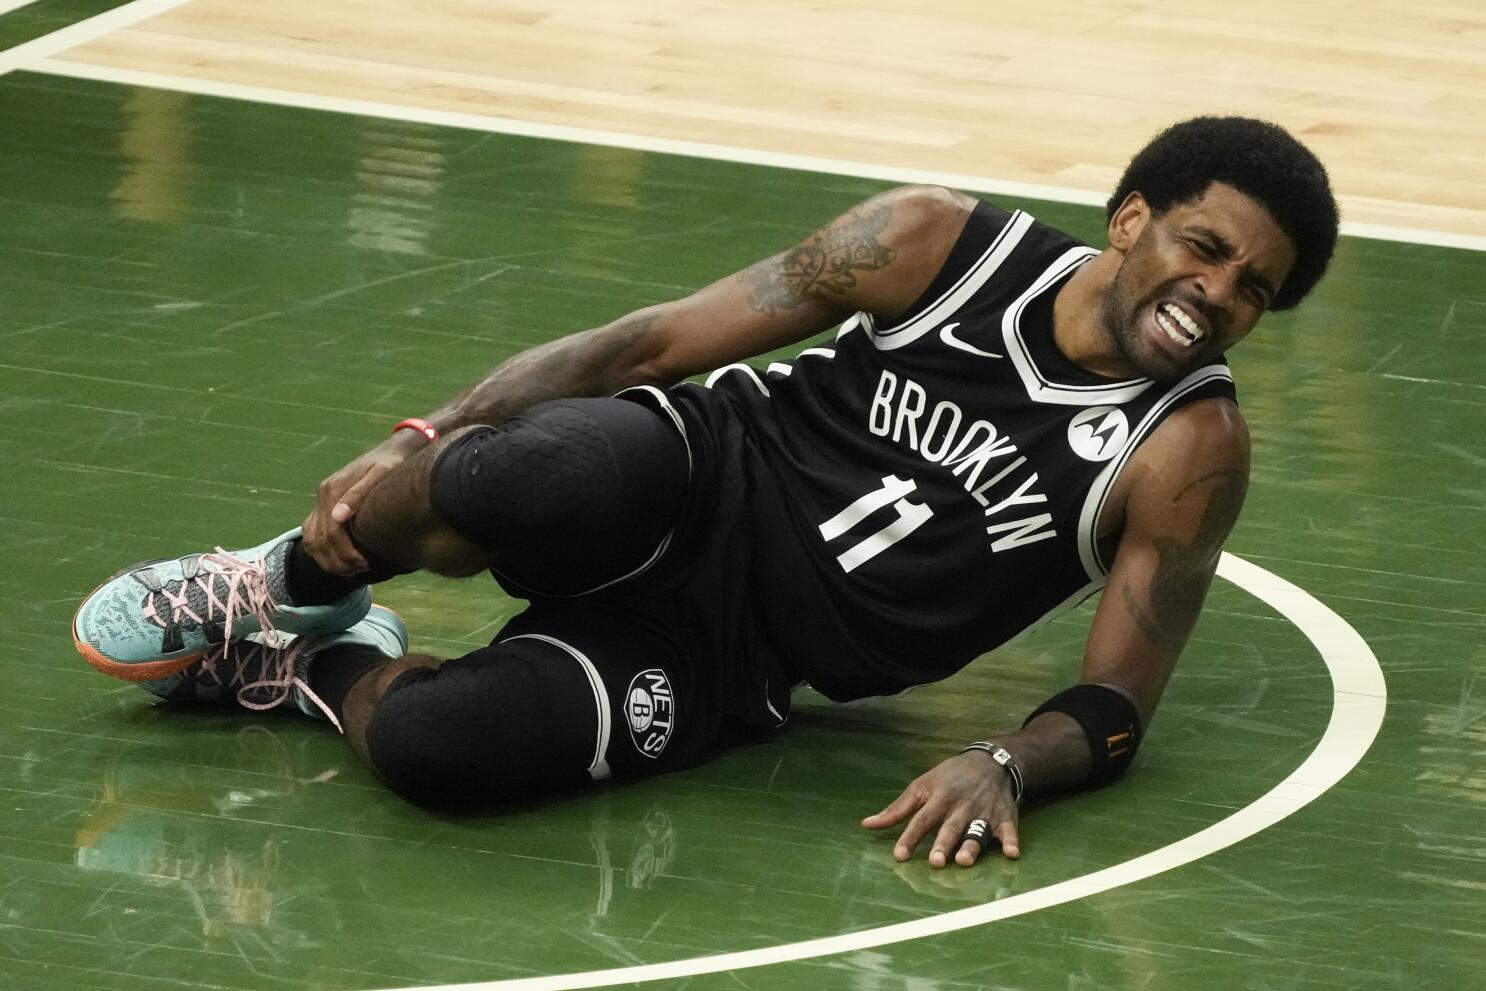 Nets Lose Game 3 to Bucks 86-83 After Erasing Big Early Deficit